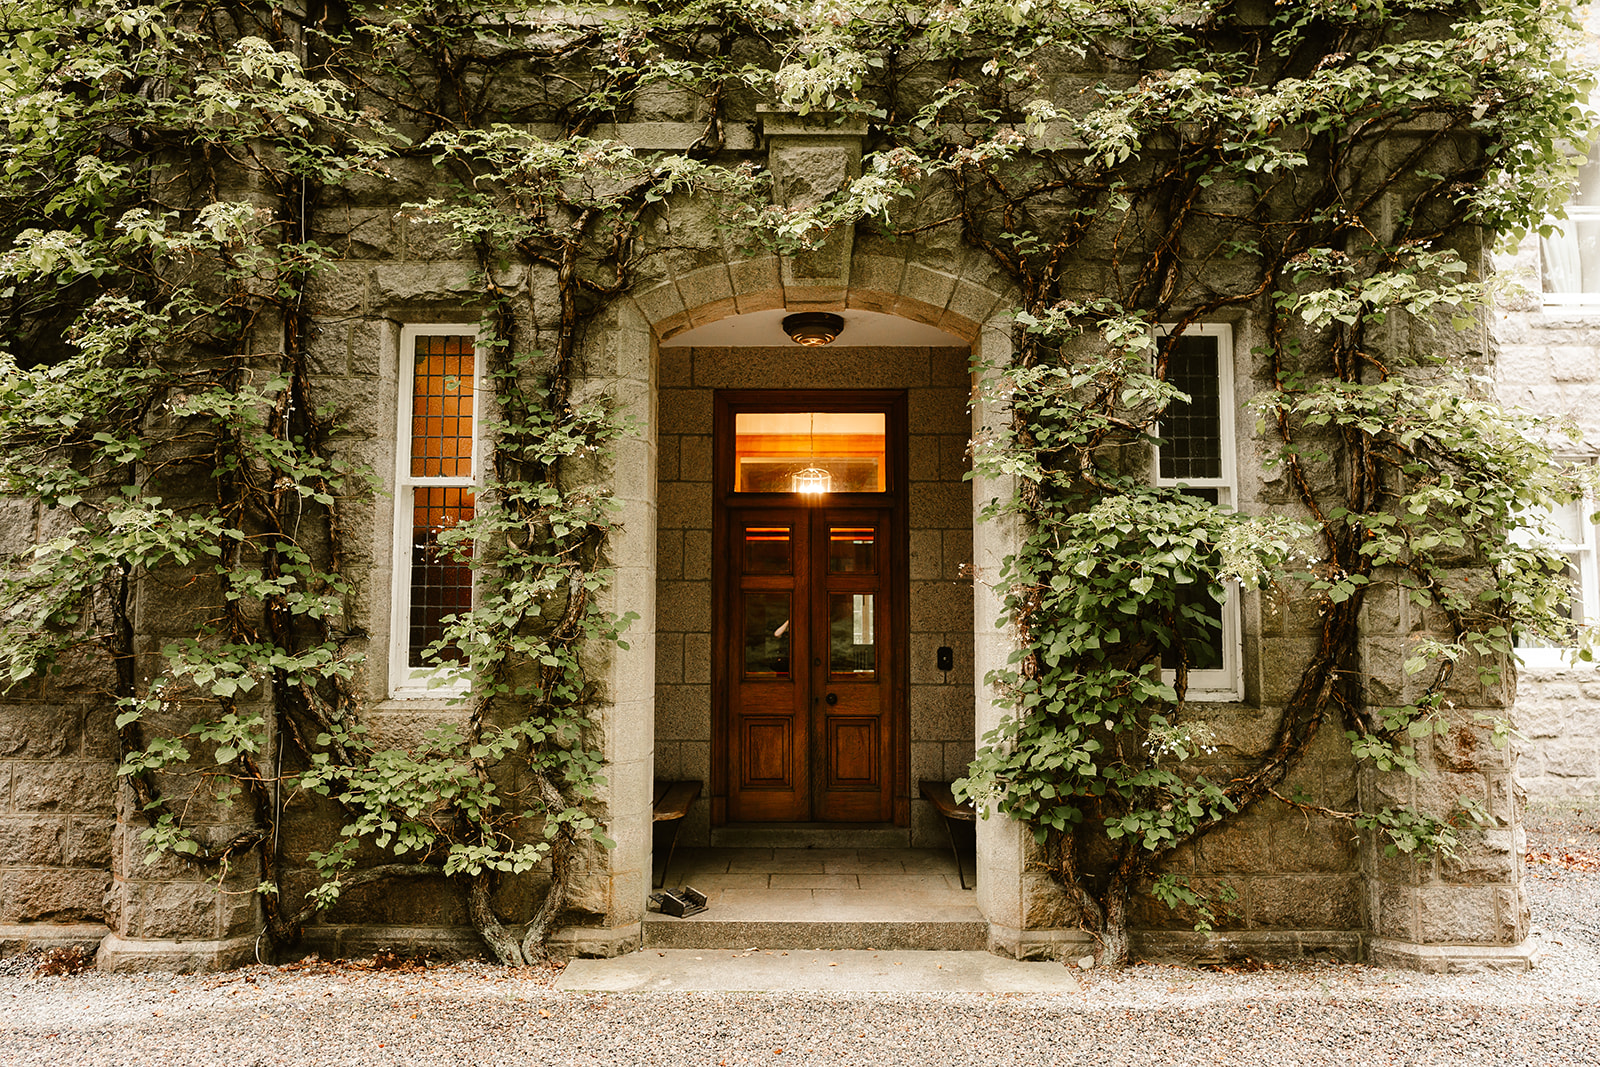 Image of a front door to a BnB with lush greenery crawling up the walls